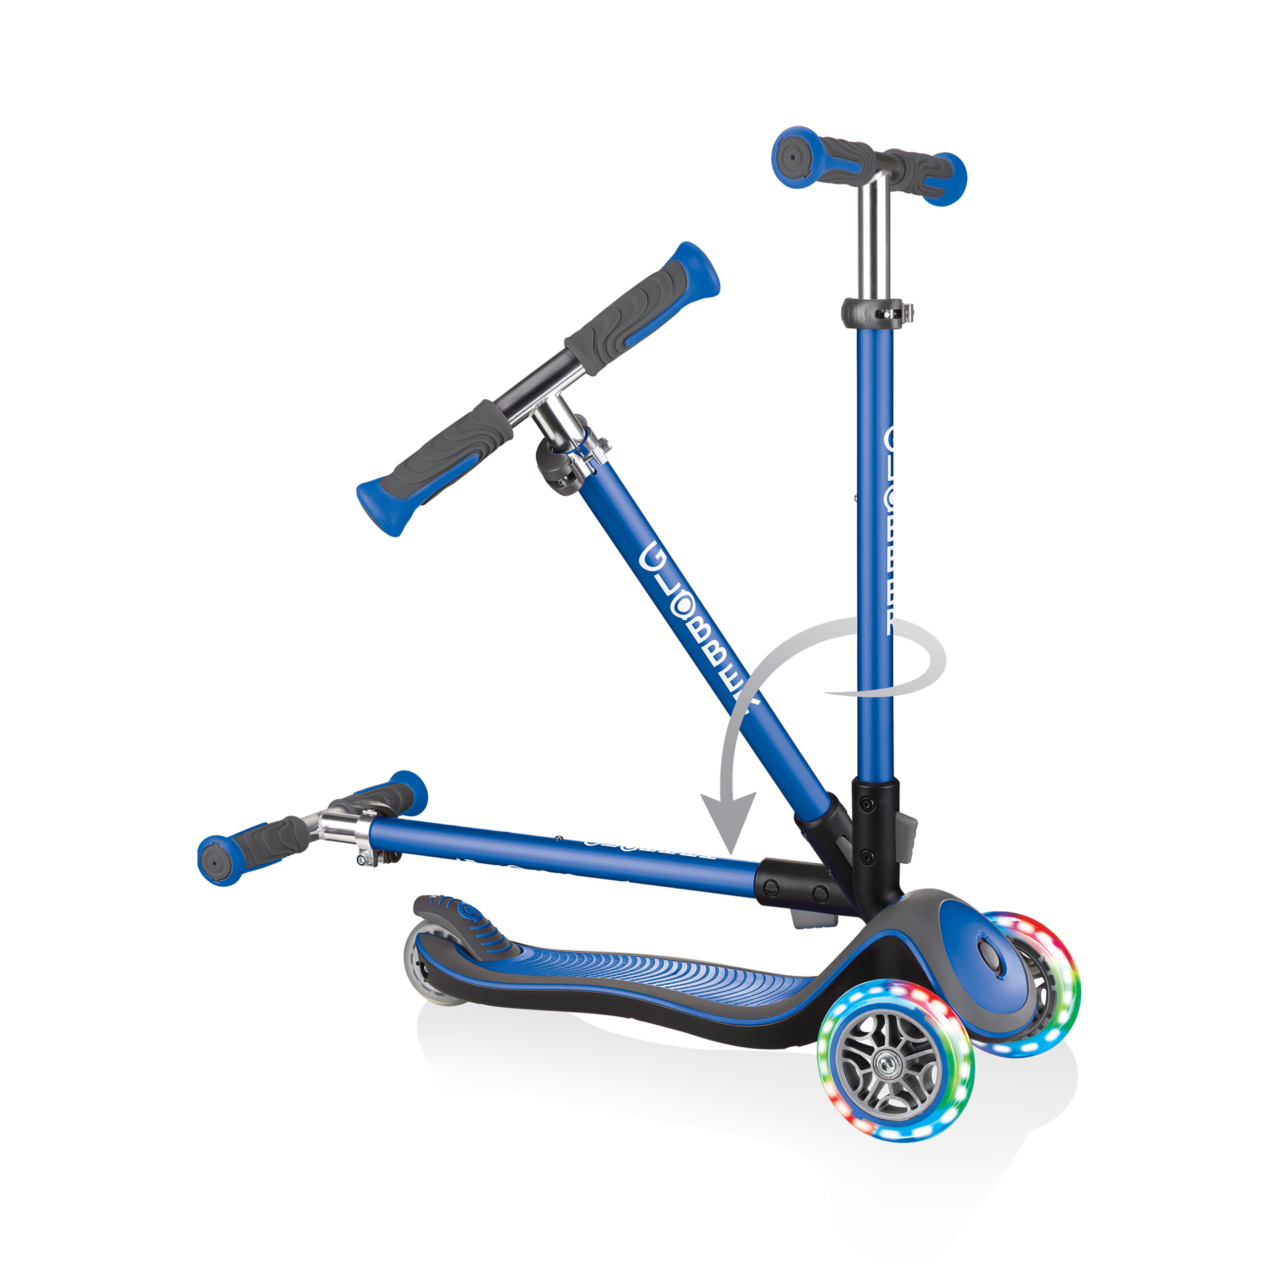 444 400 Adjustable 3 Wheel Scooter With Lights